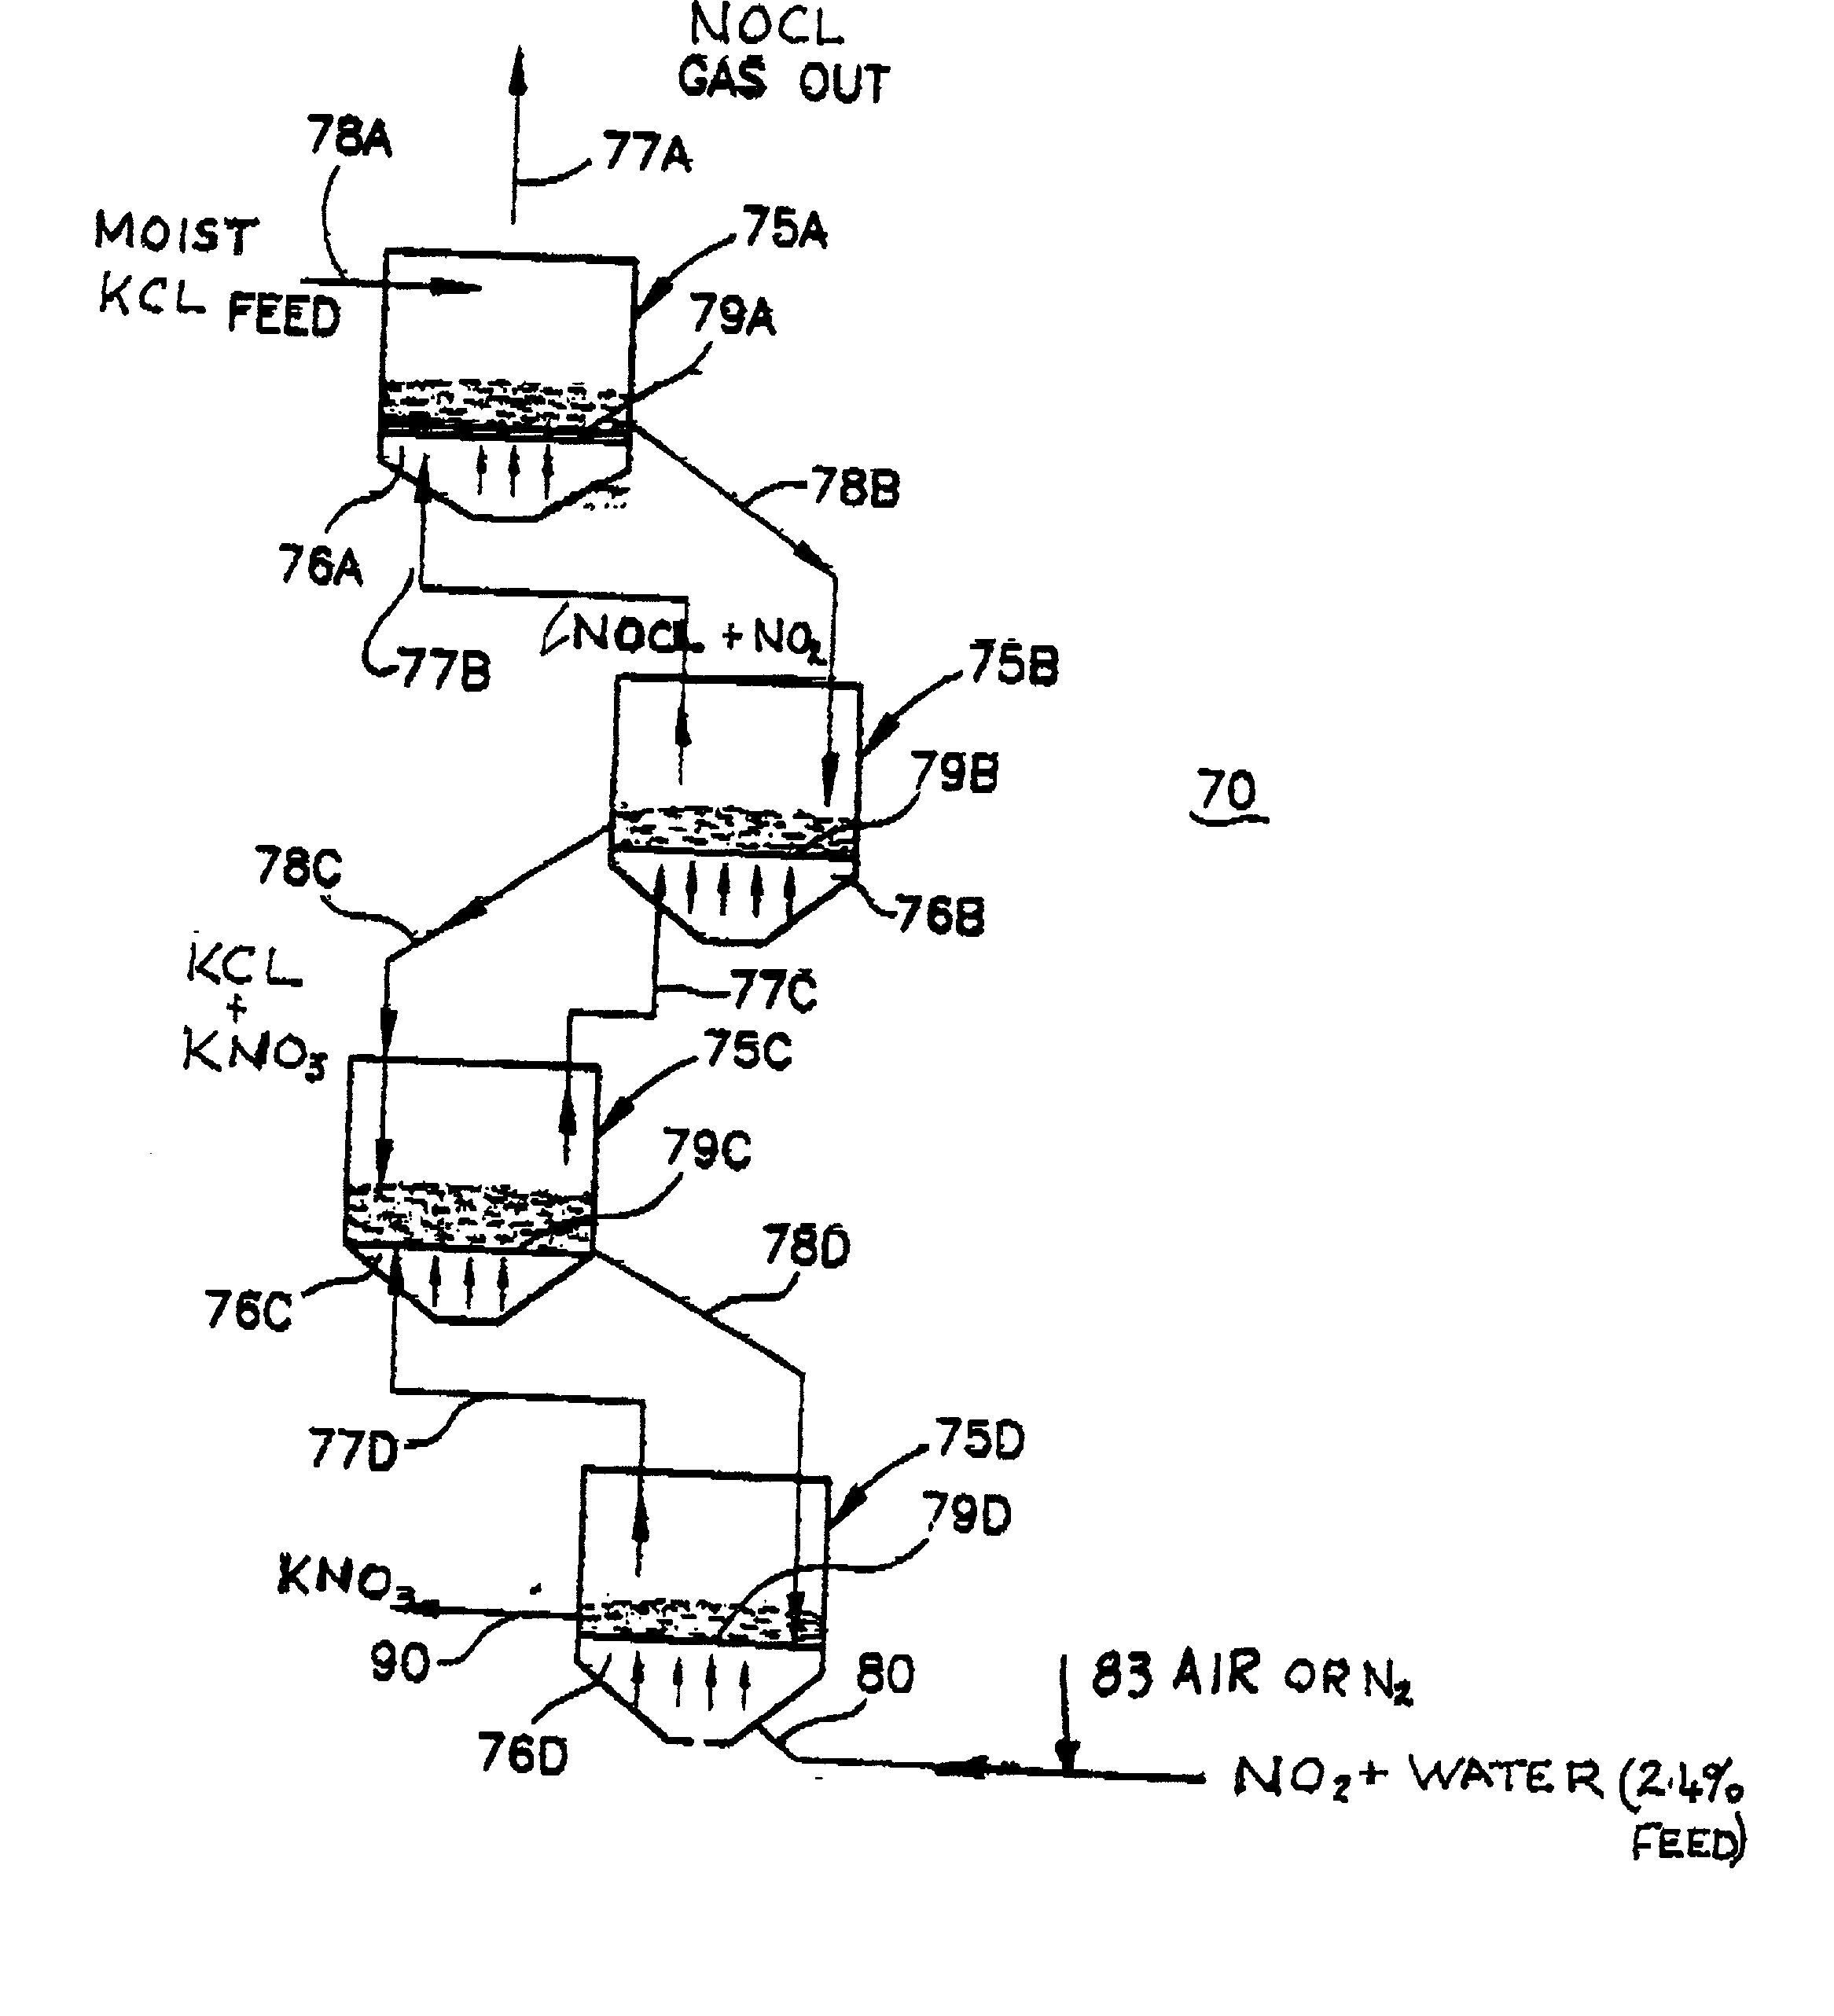 Process for manufacturing potassium nitrate fertilizer and other metal nitrates